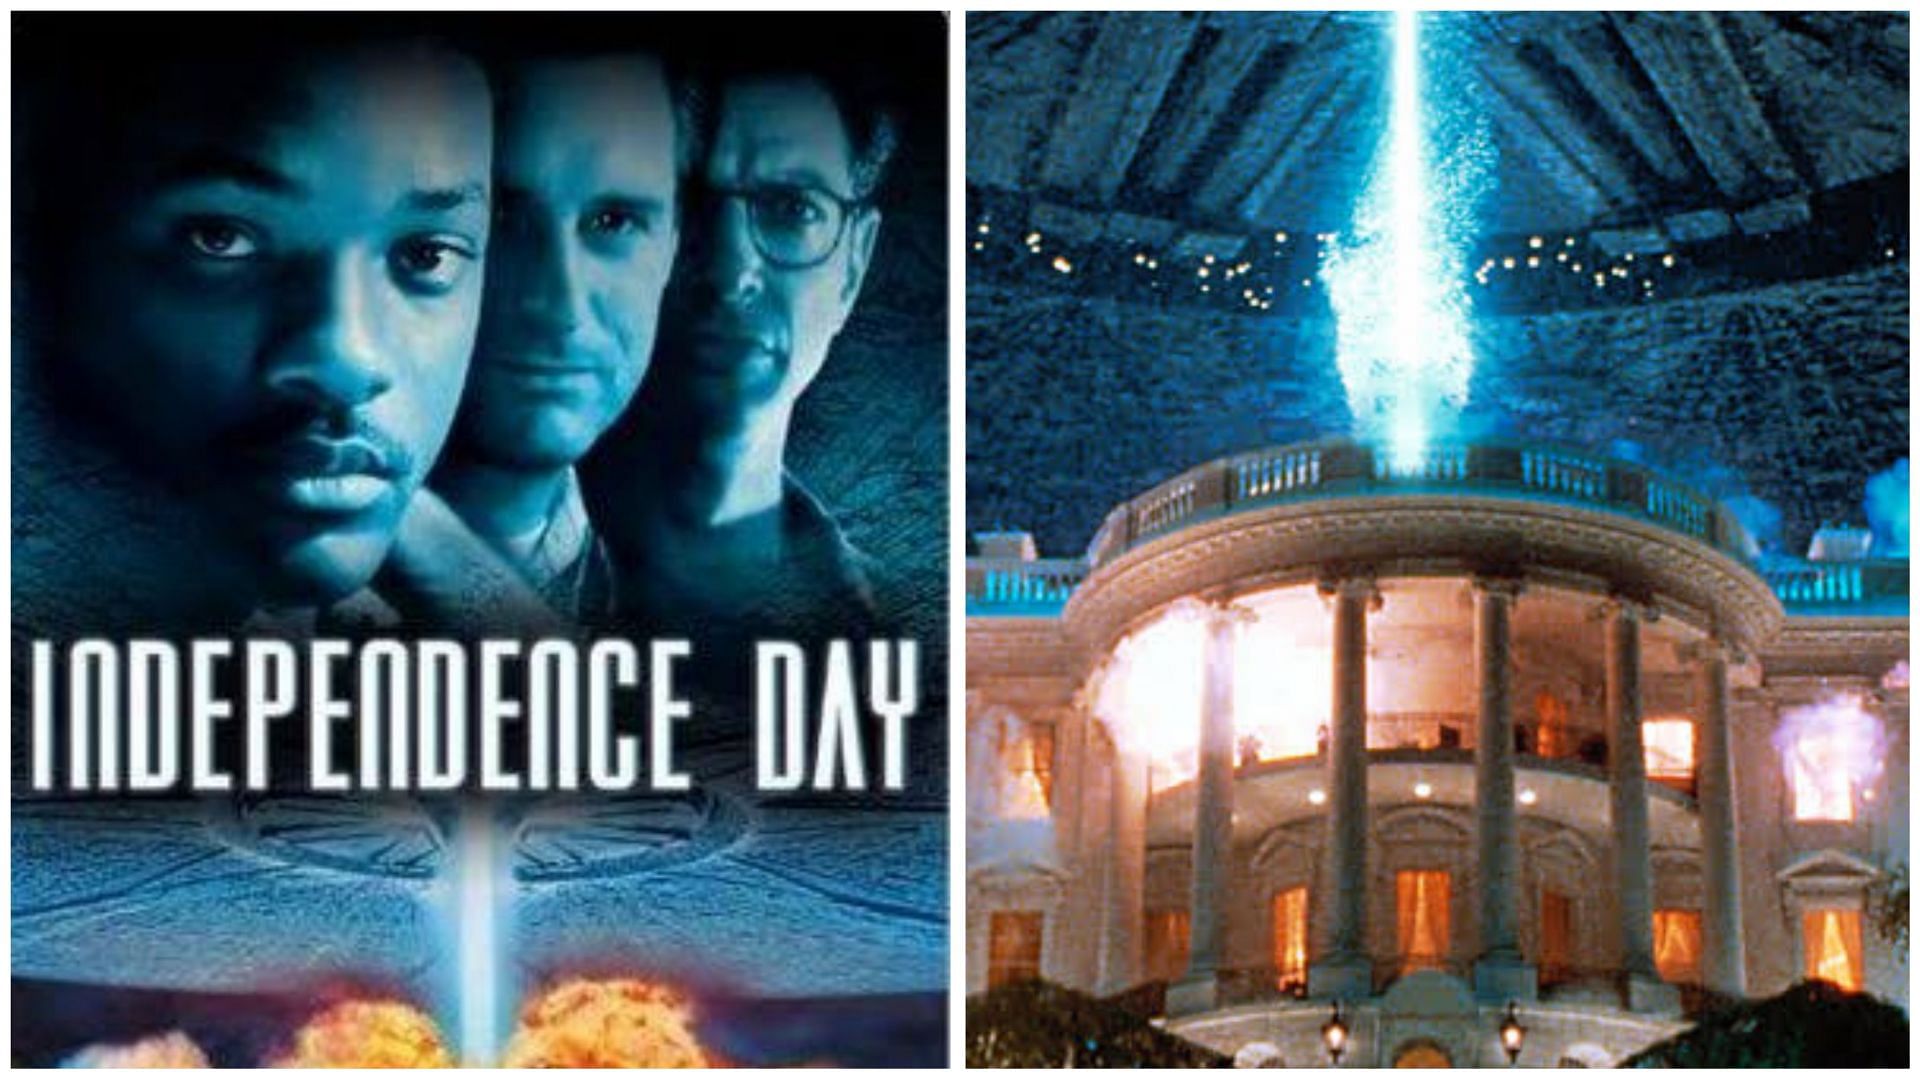 Independence Day (Images via IMDb)